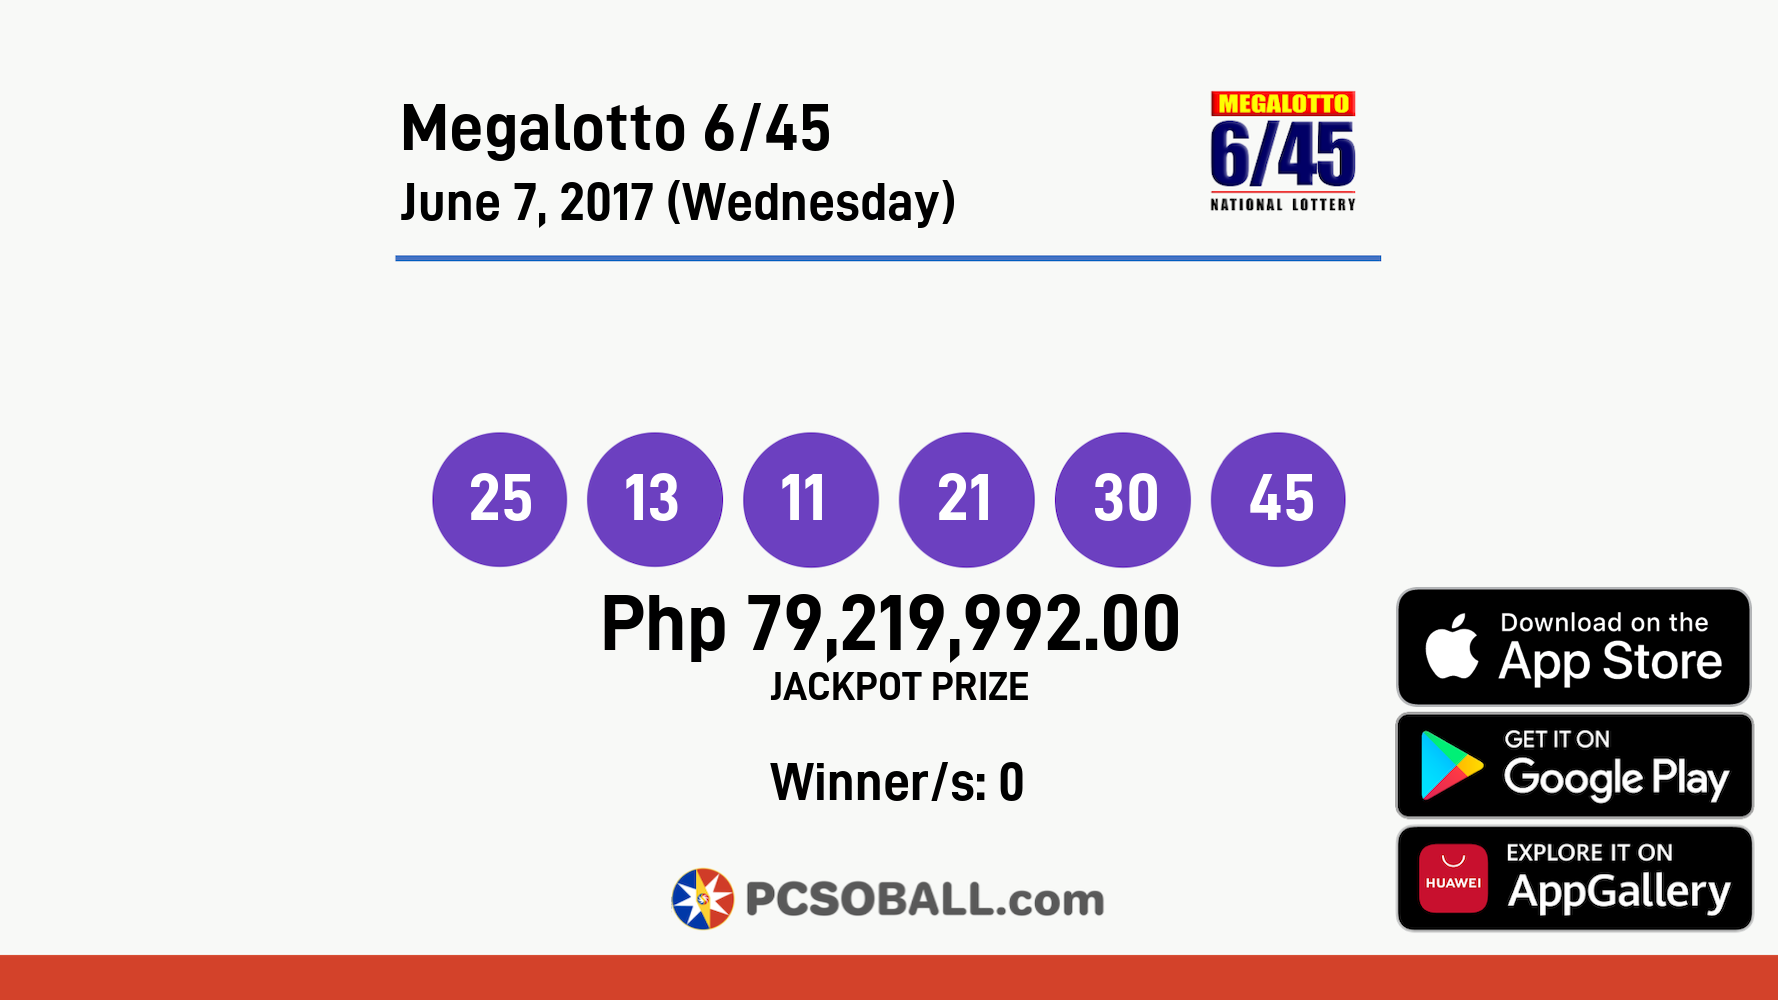 Megalotto 6/45 June 7, 2017 (Wednesday) Result